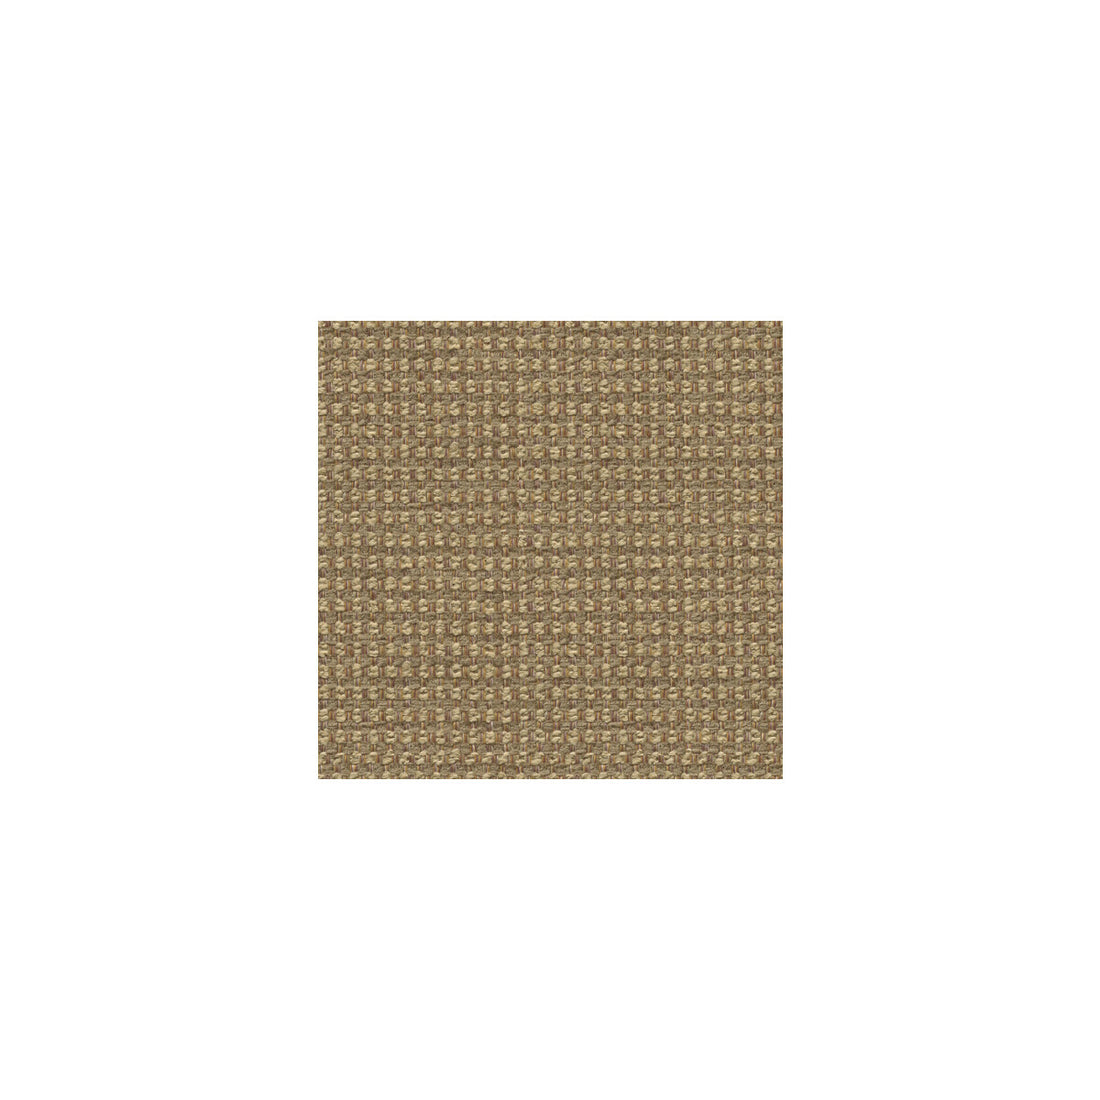 Queen fabric in suede color - pattern 28767.106.0 - by Kravet Smart in the Gis collection